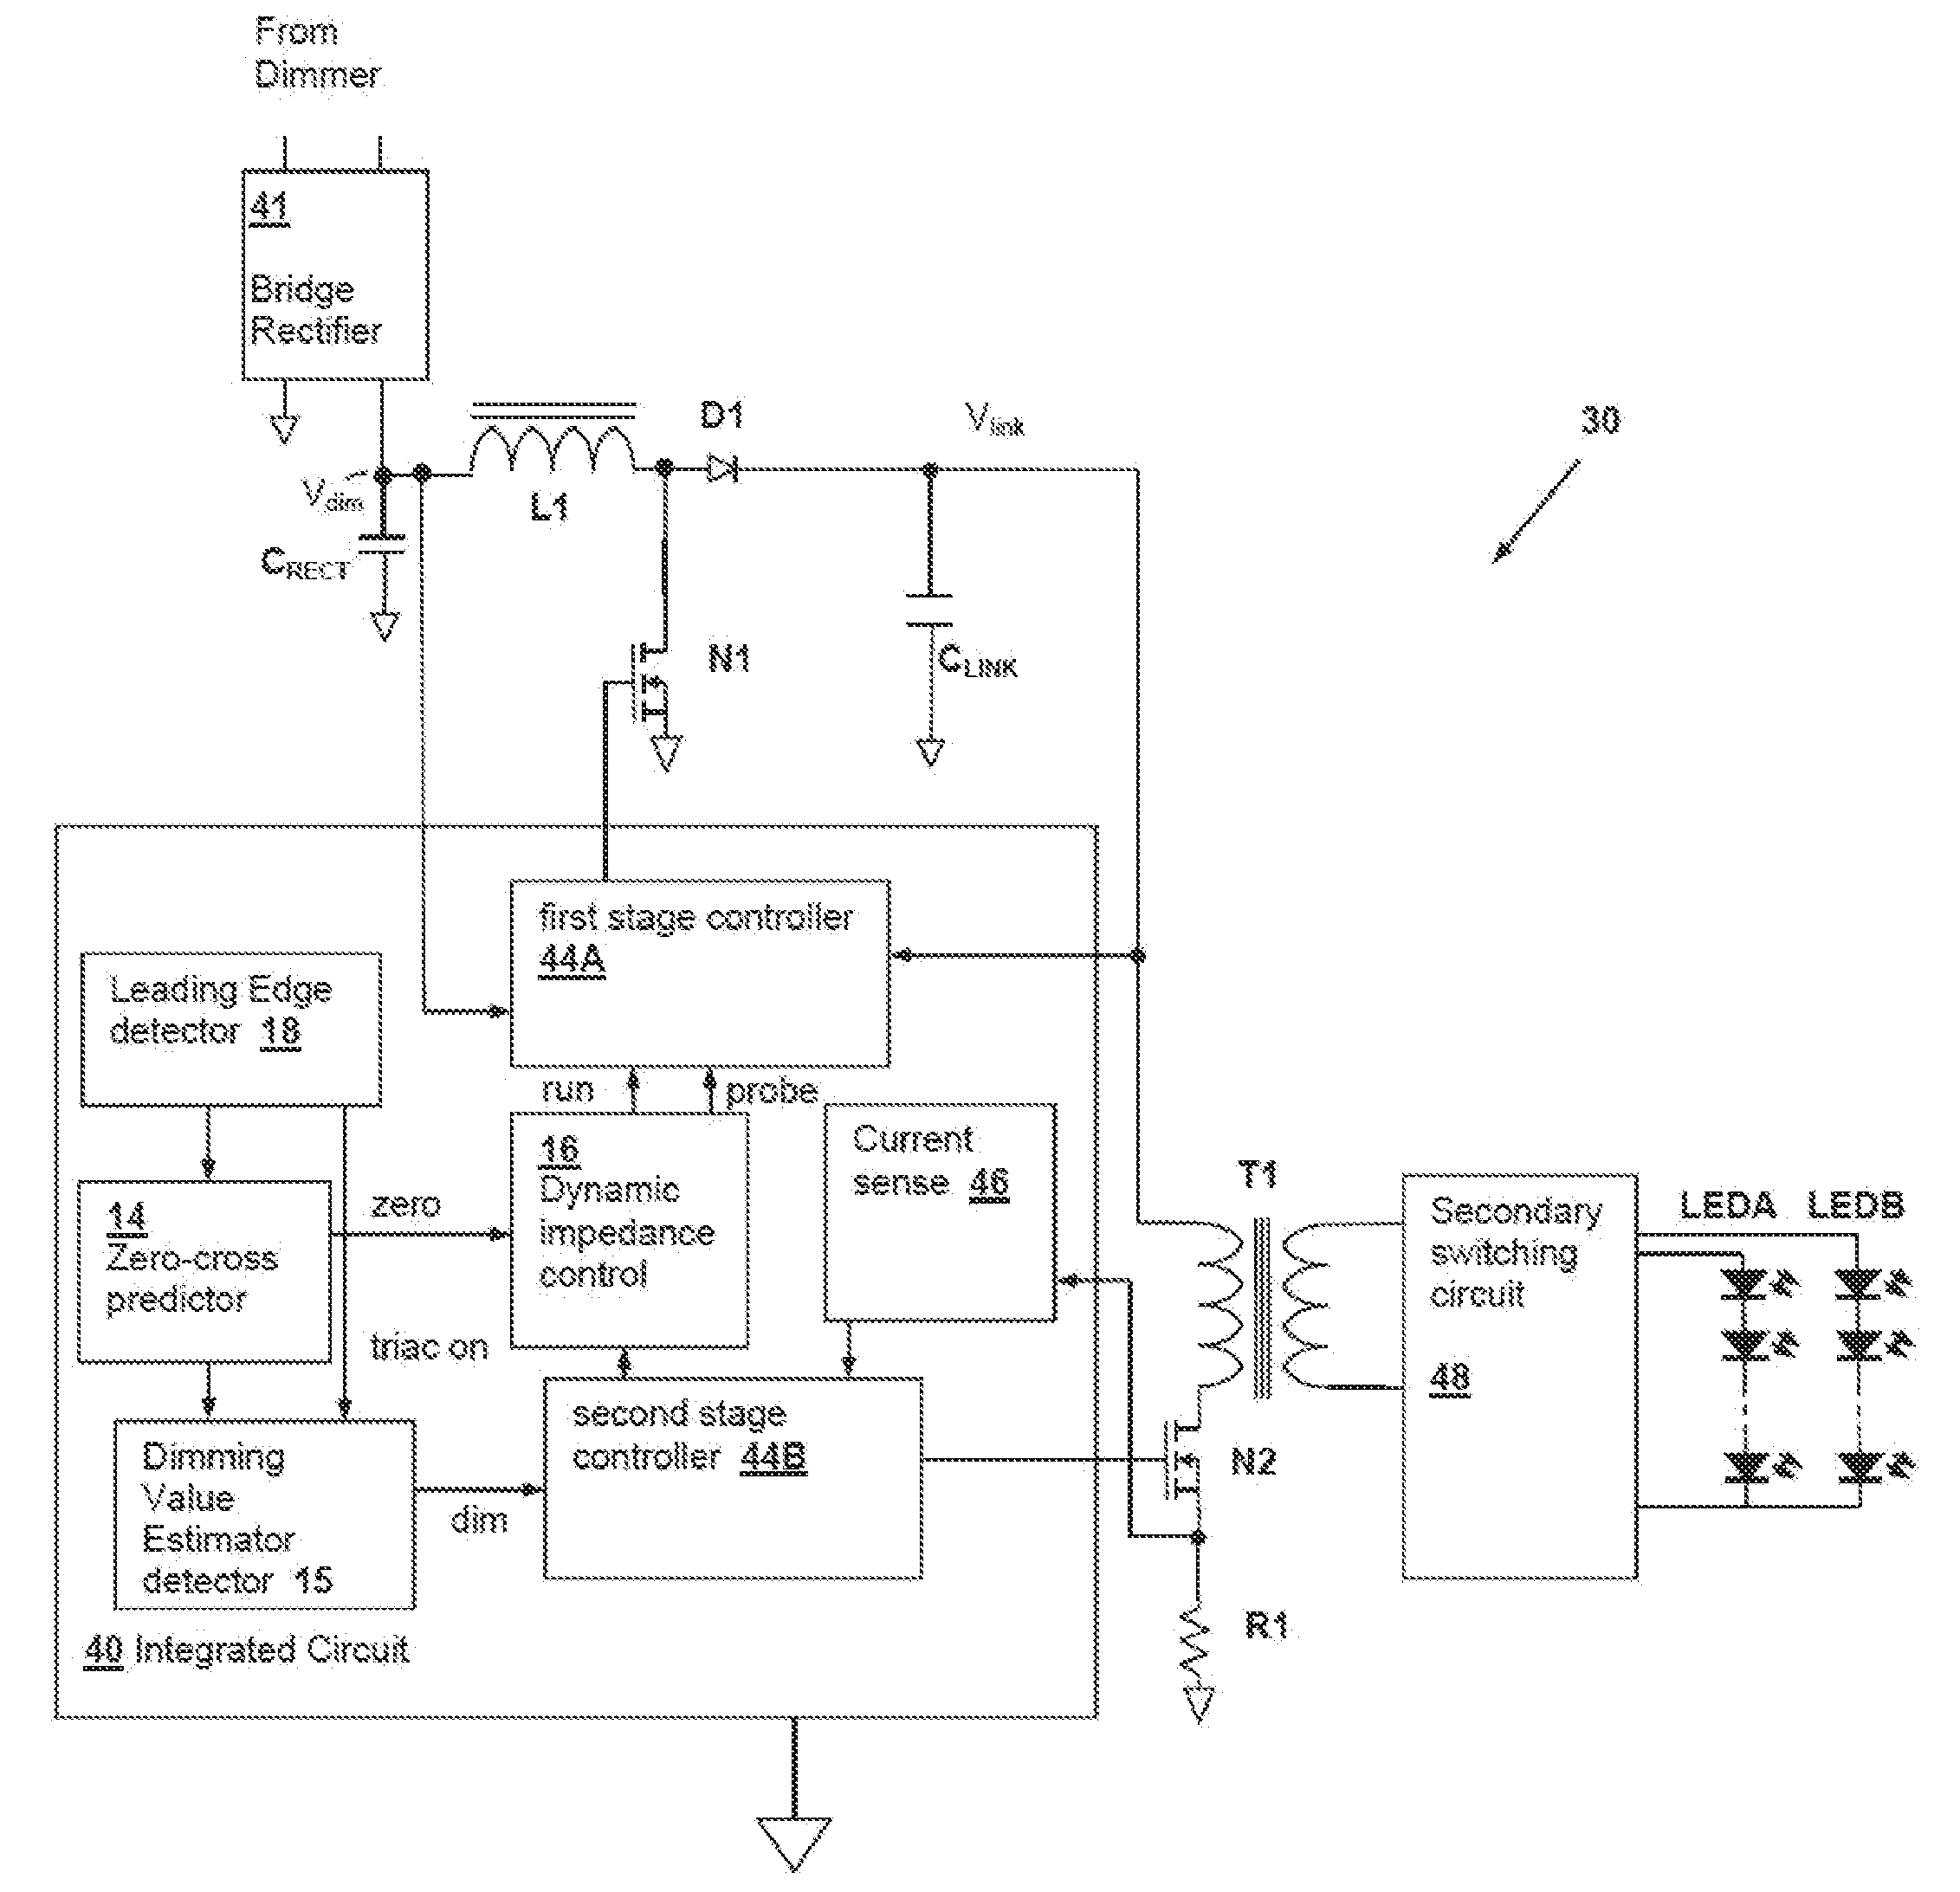 Input Voltage Sensing For A Switching Power Converter And A Triac-Based Dimmer